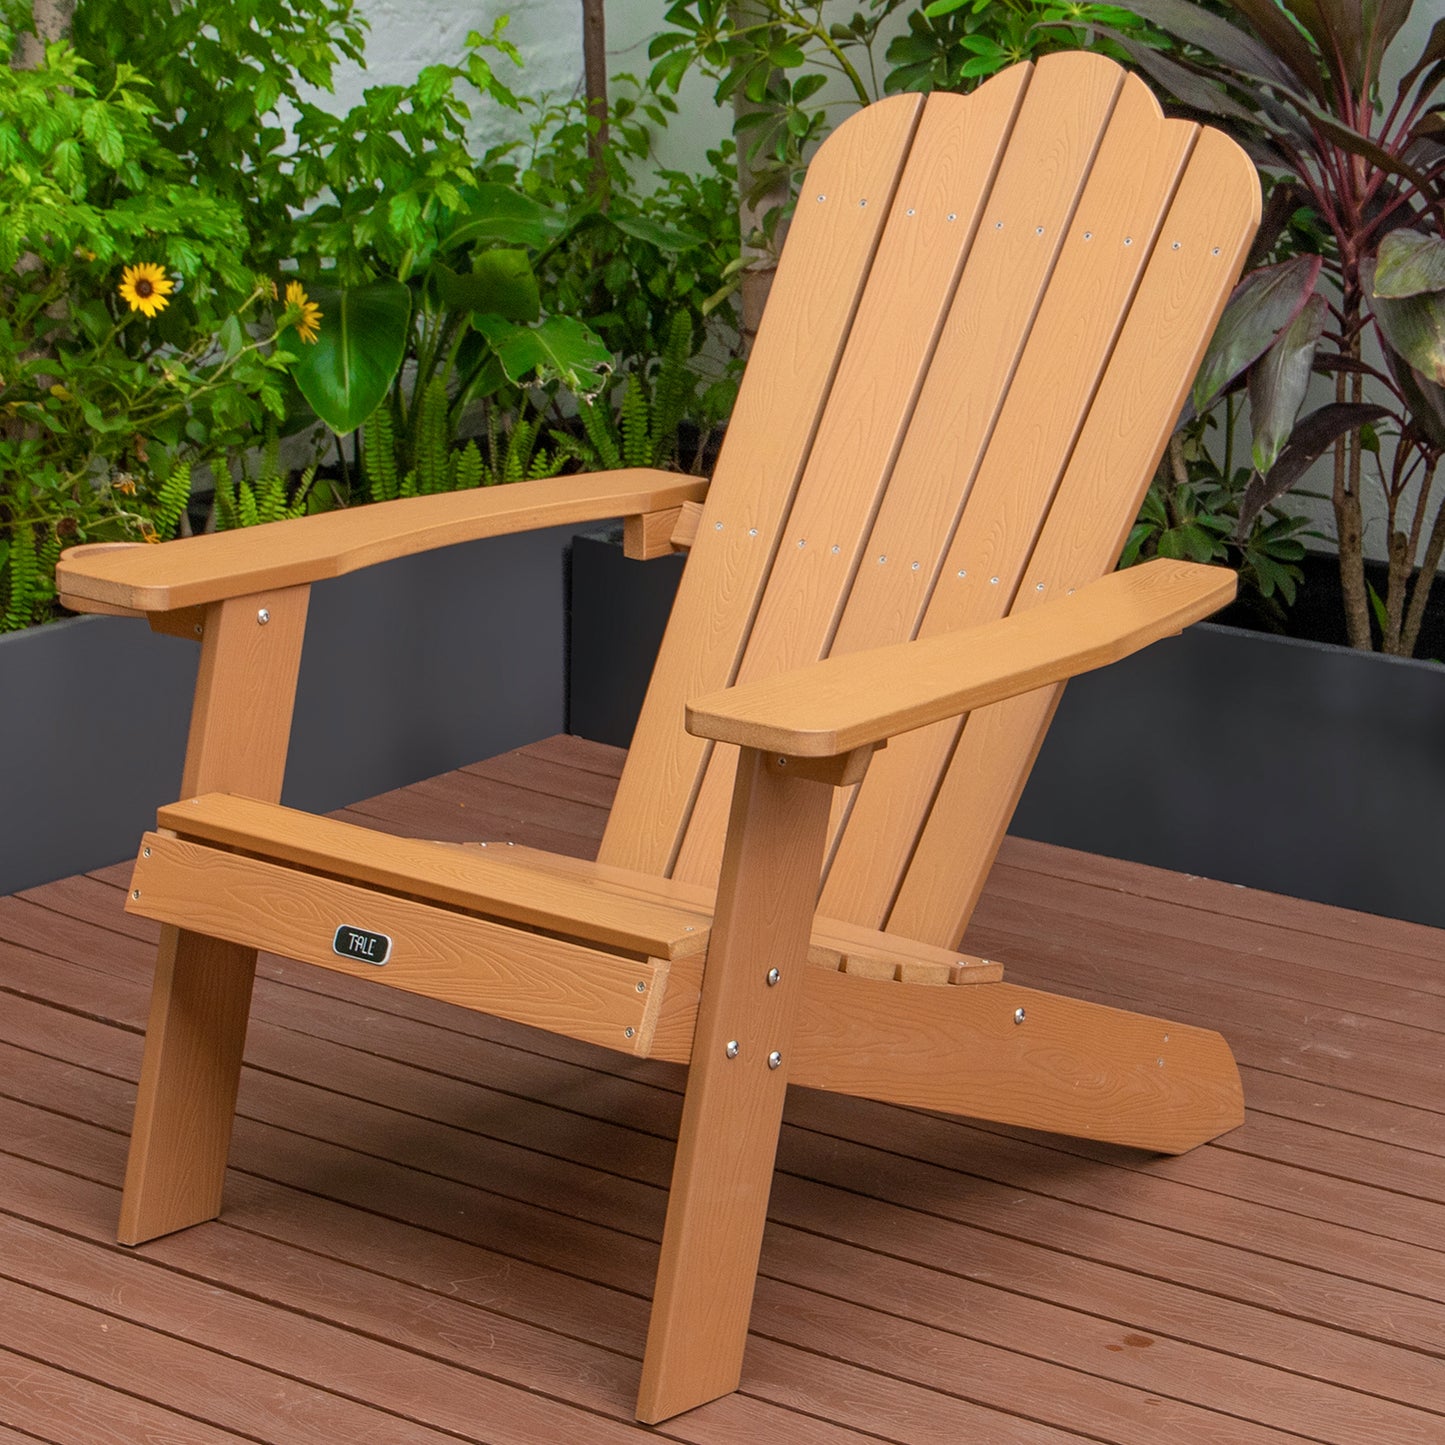 TALE Adirondack Chair Backyard Outdoor Furniture Painted Seating